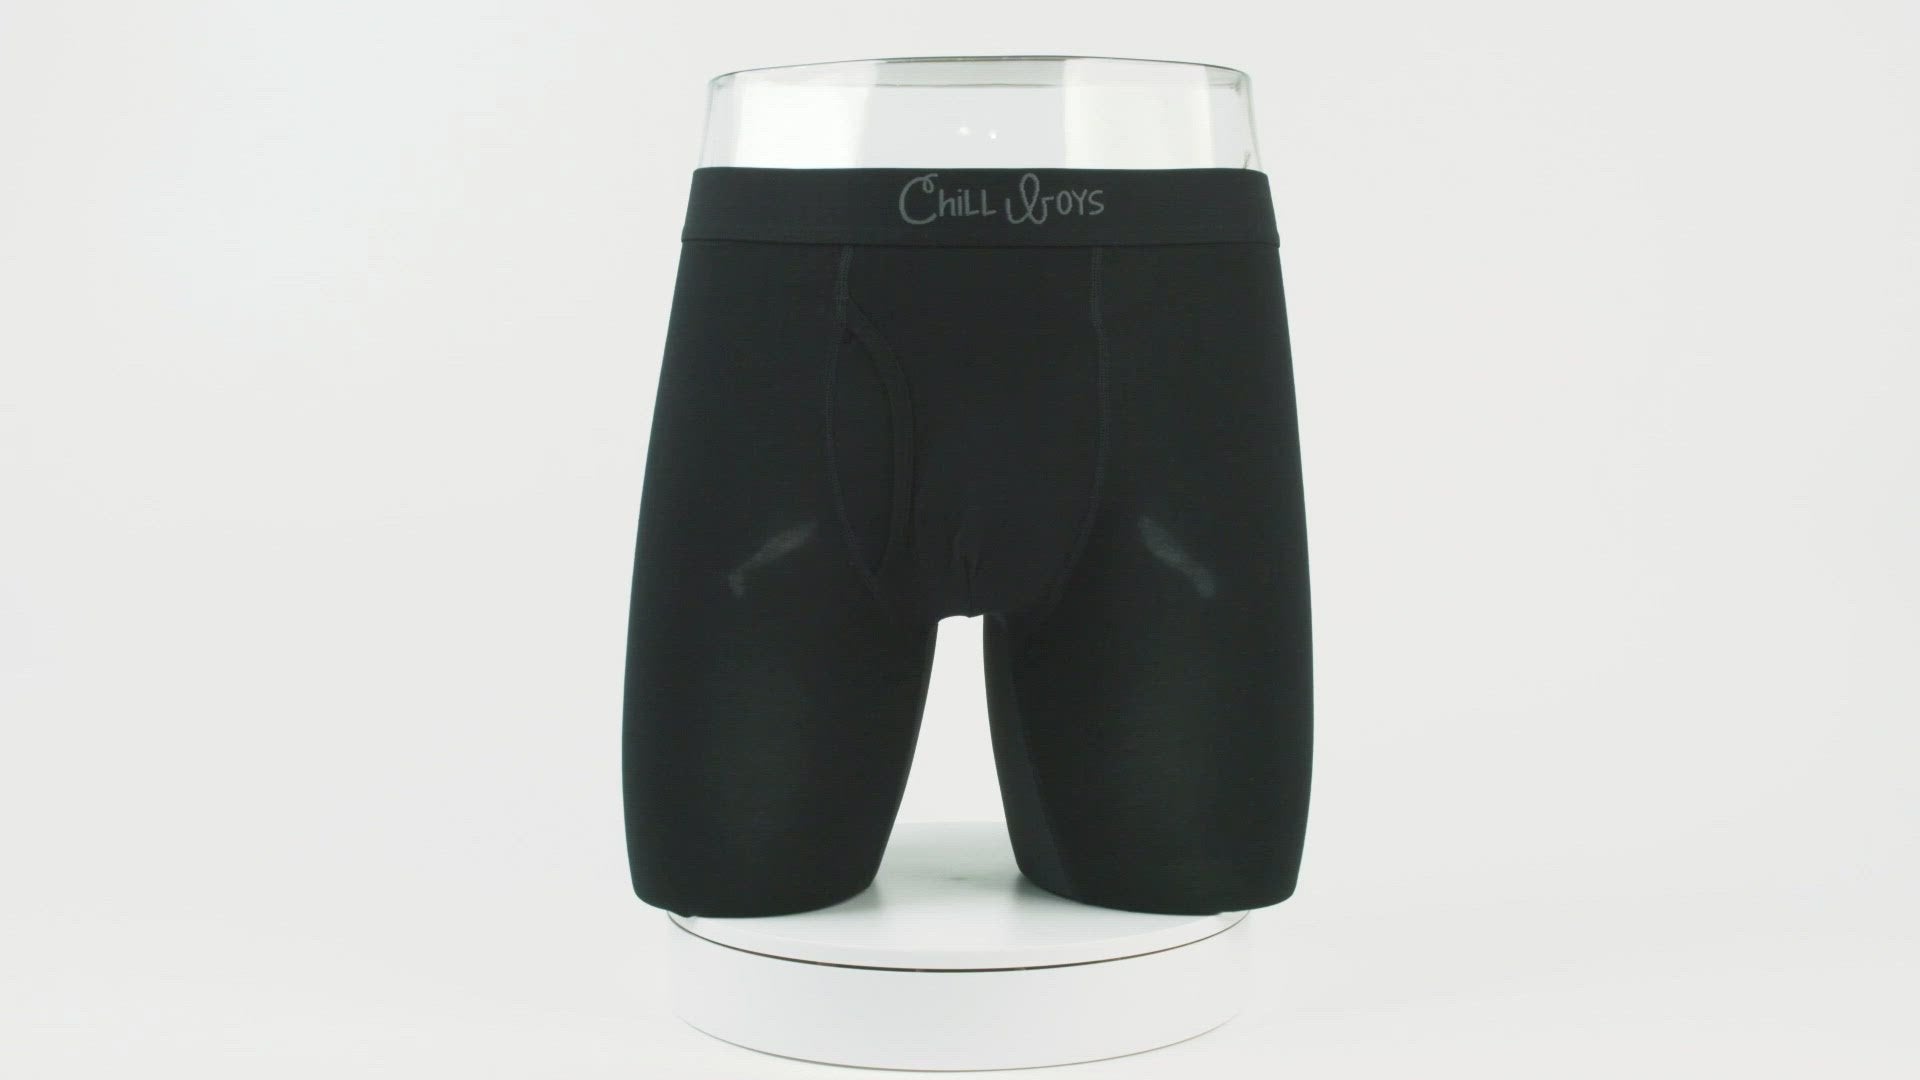 Buy Soft & Anti-Chafing Bamboo Boxer Briefs For Men - Chill Boys